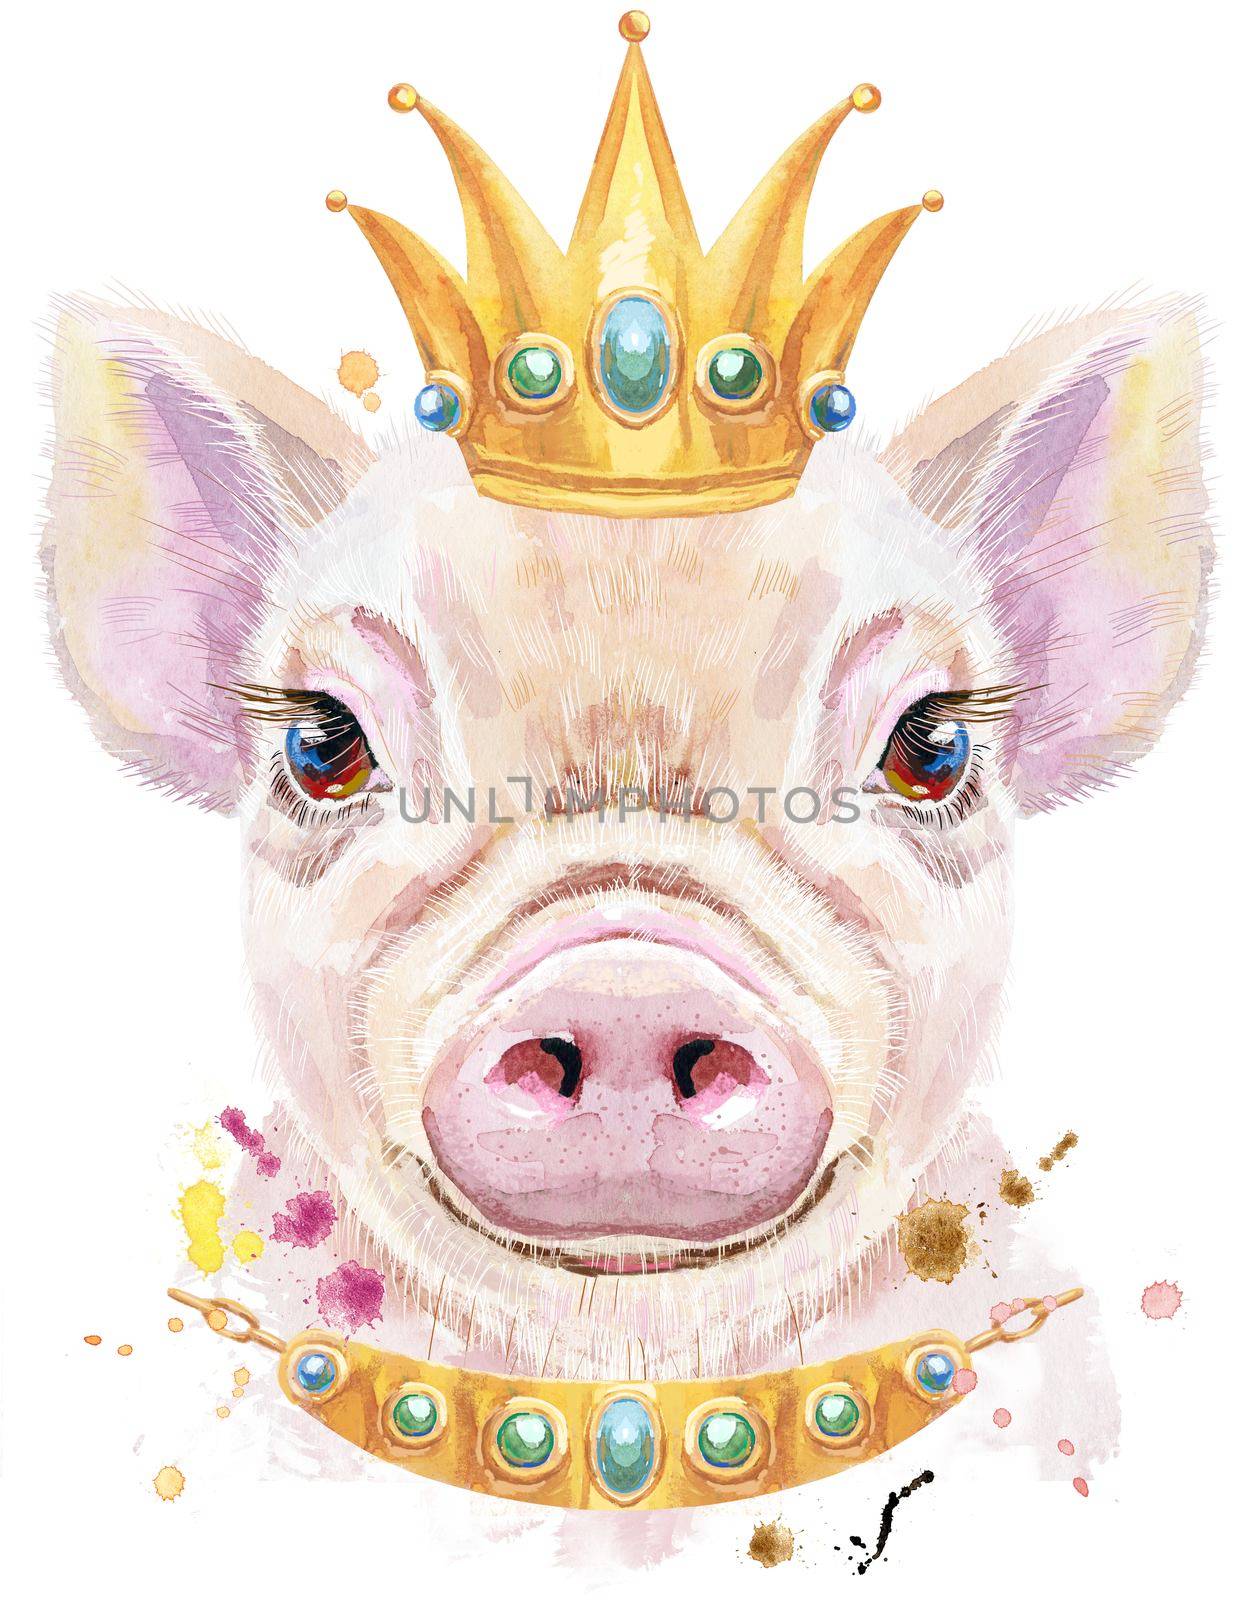 Cute piggy. Pig for T-shirt graphics. Watercolor pink mini pig illustration with crown